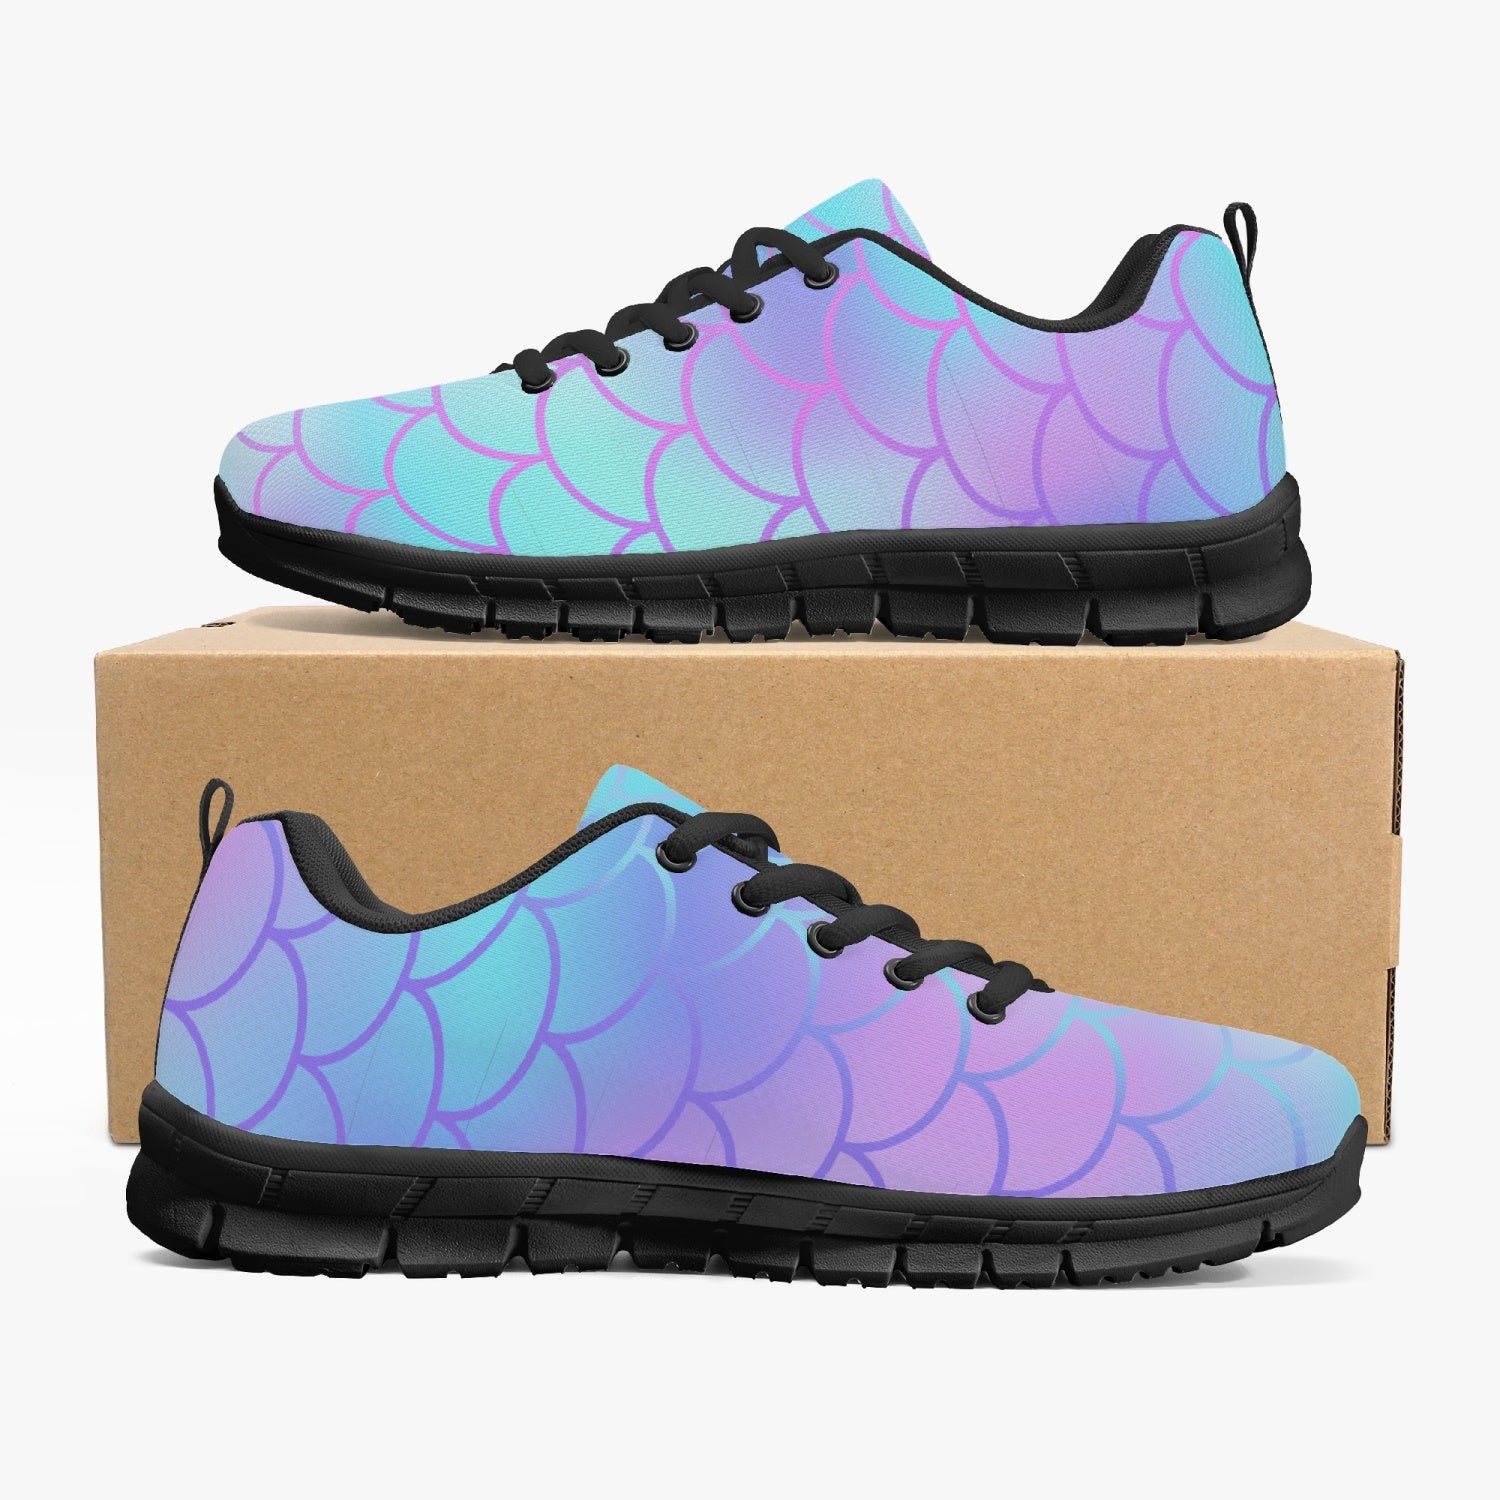 Women's Pink Blue Mermaid Half Scales Workout Gym Sneakers Inside Outside View